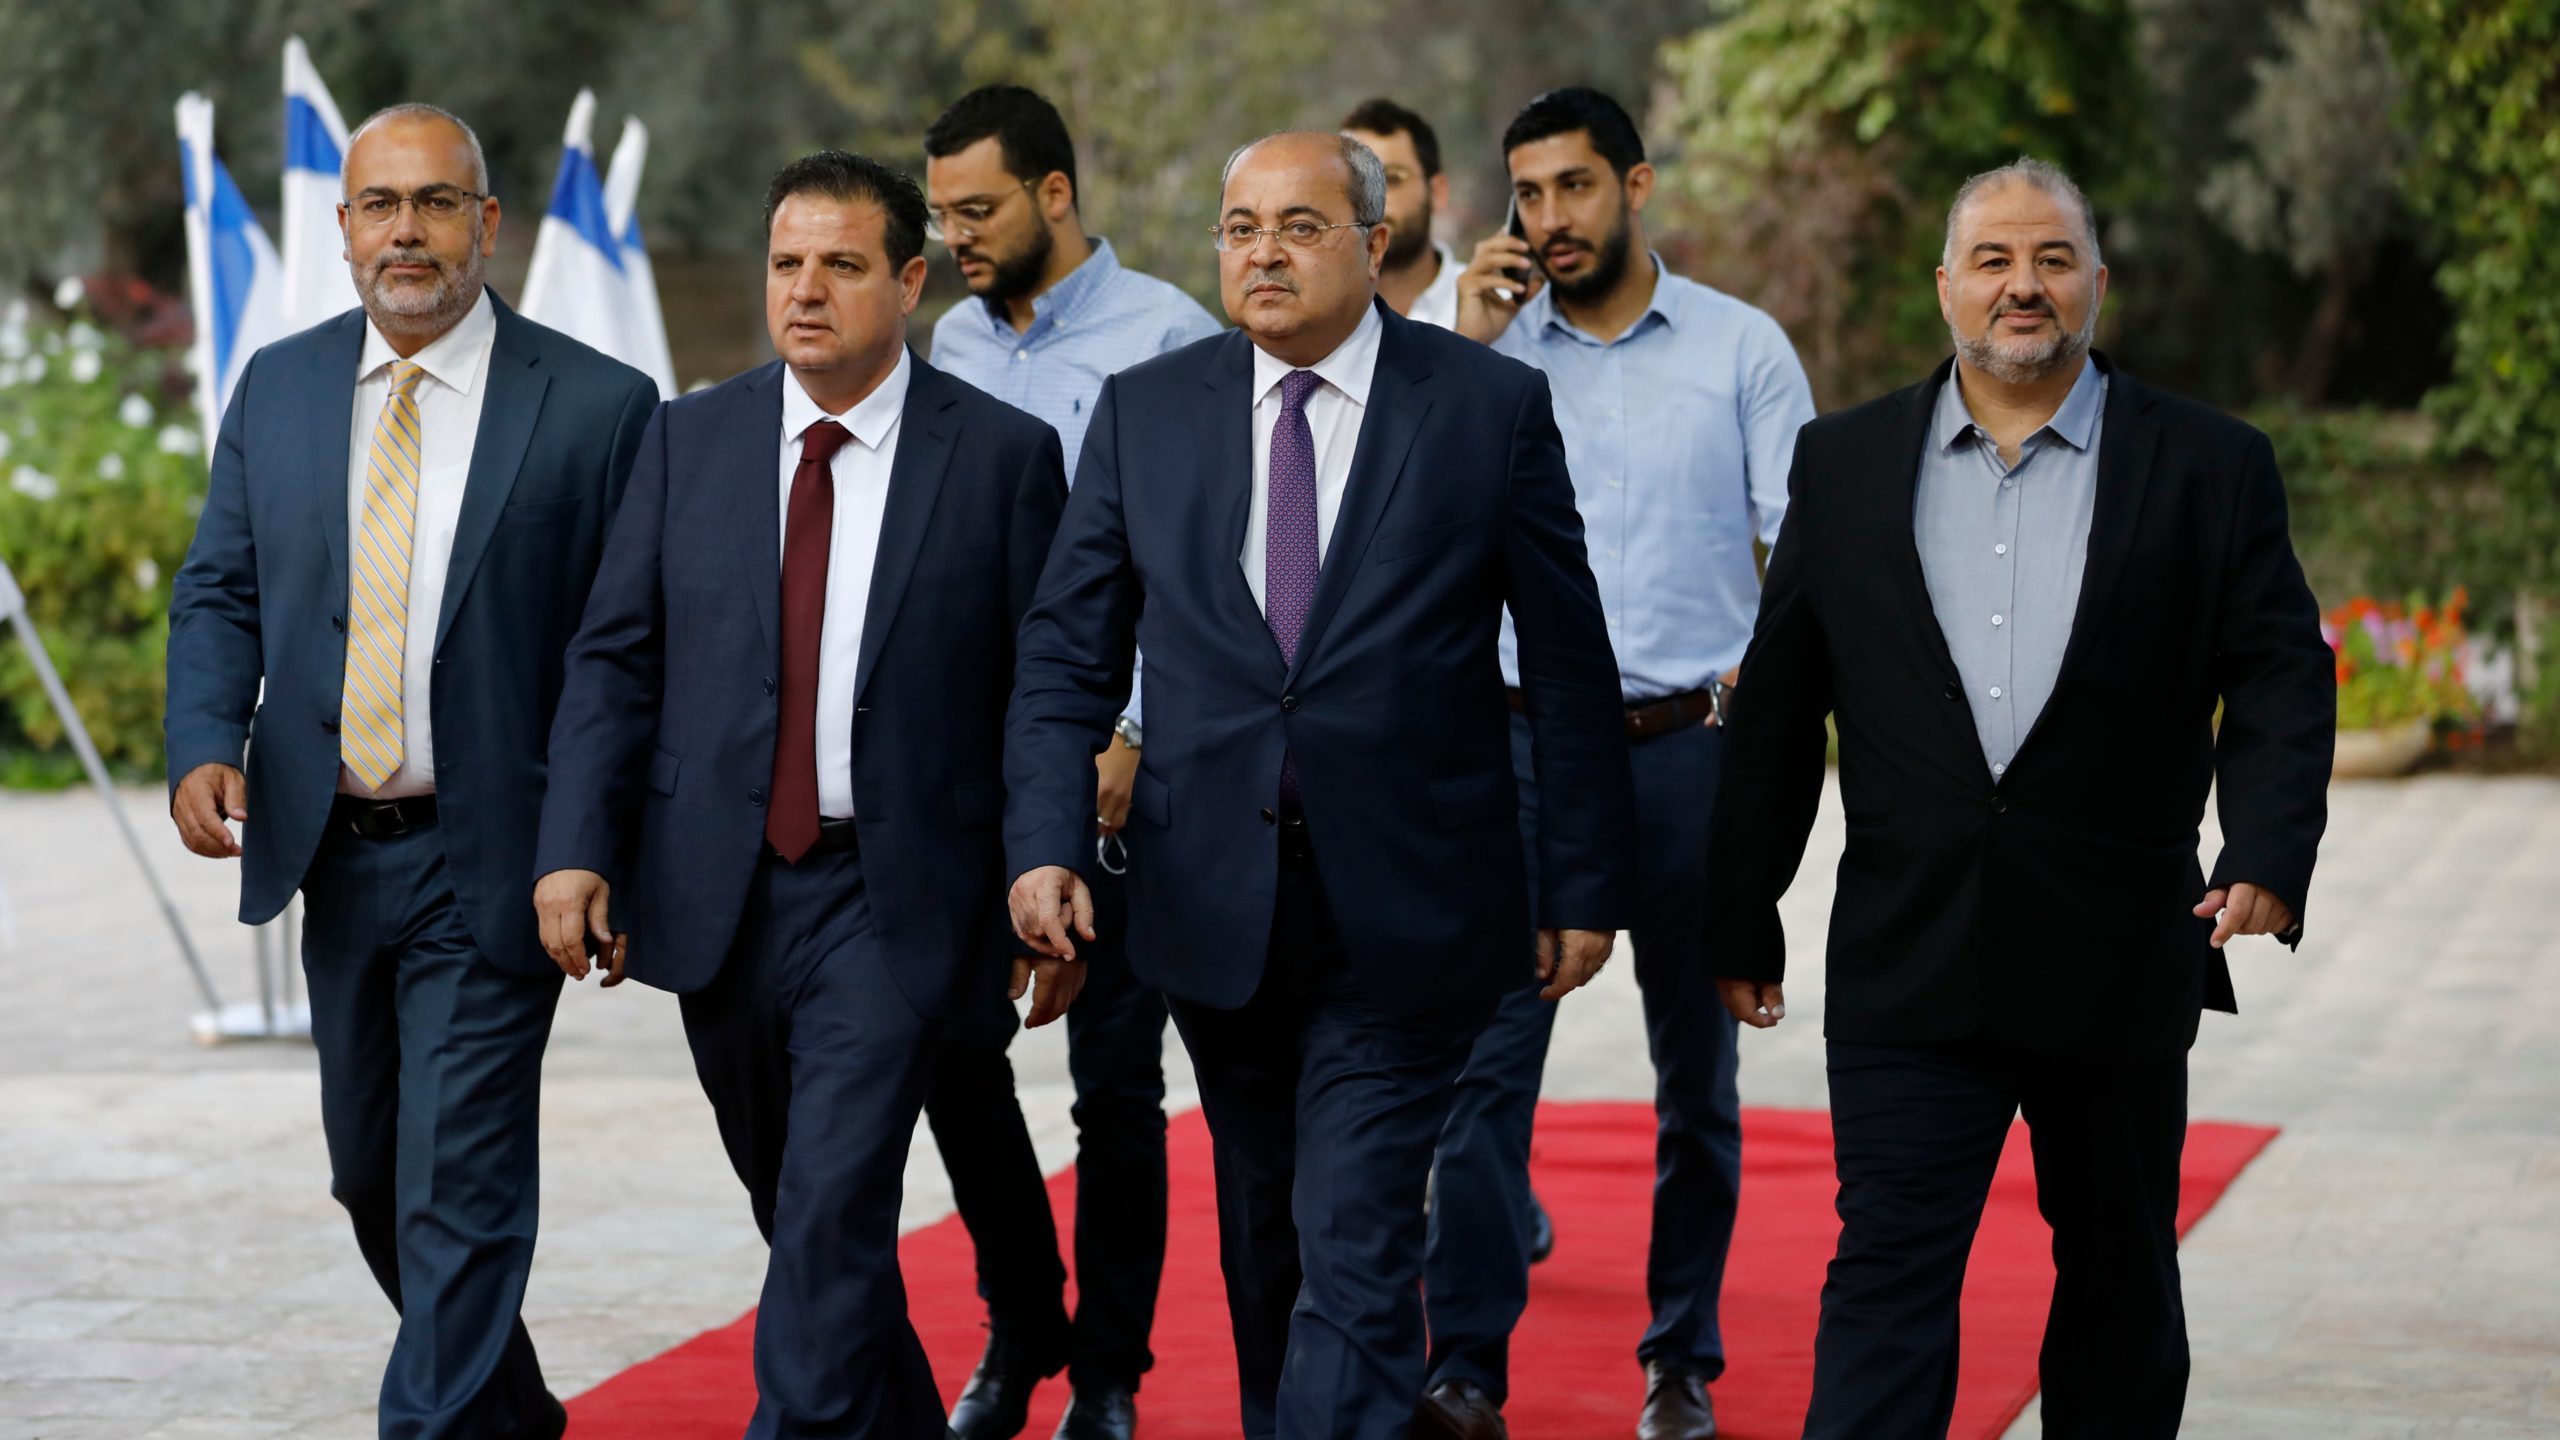 Israel’s Arab Joint List Comes Apart as Elections Approach